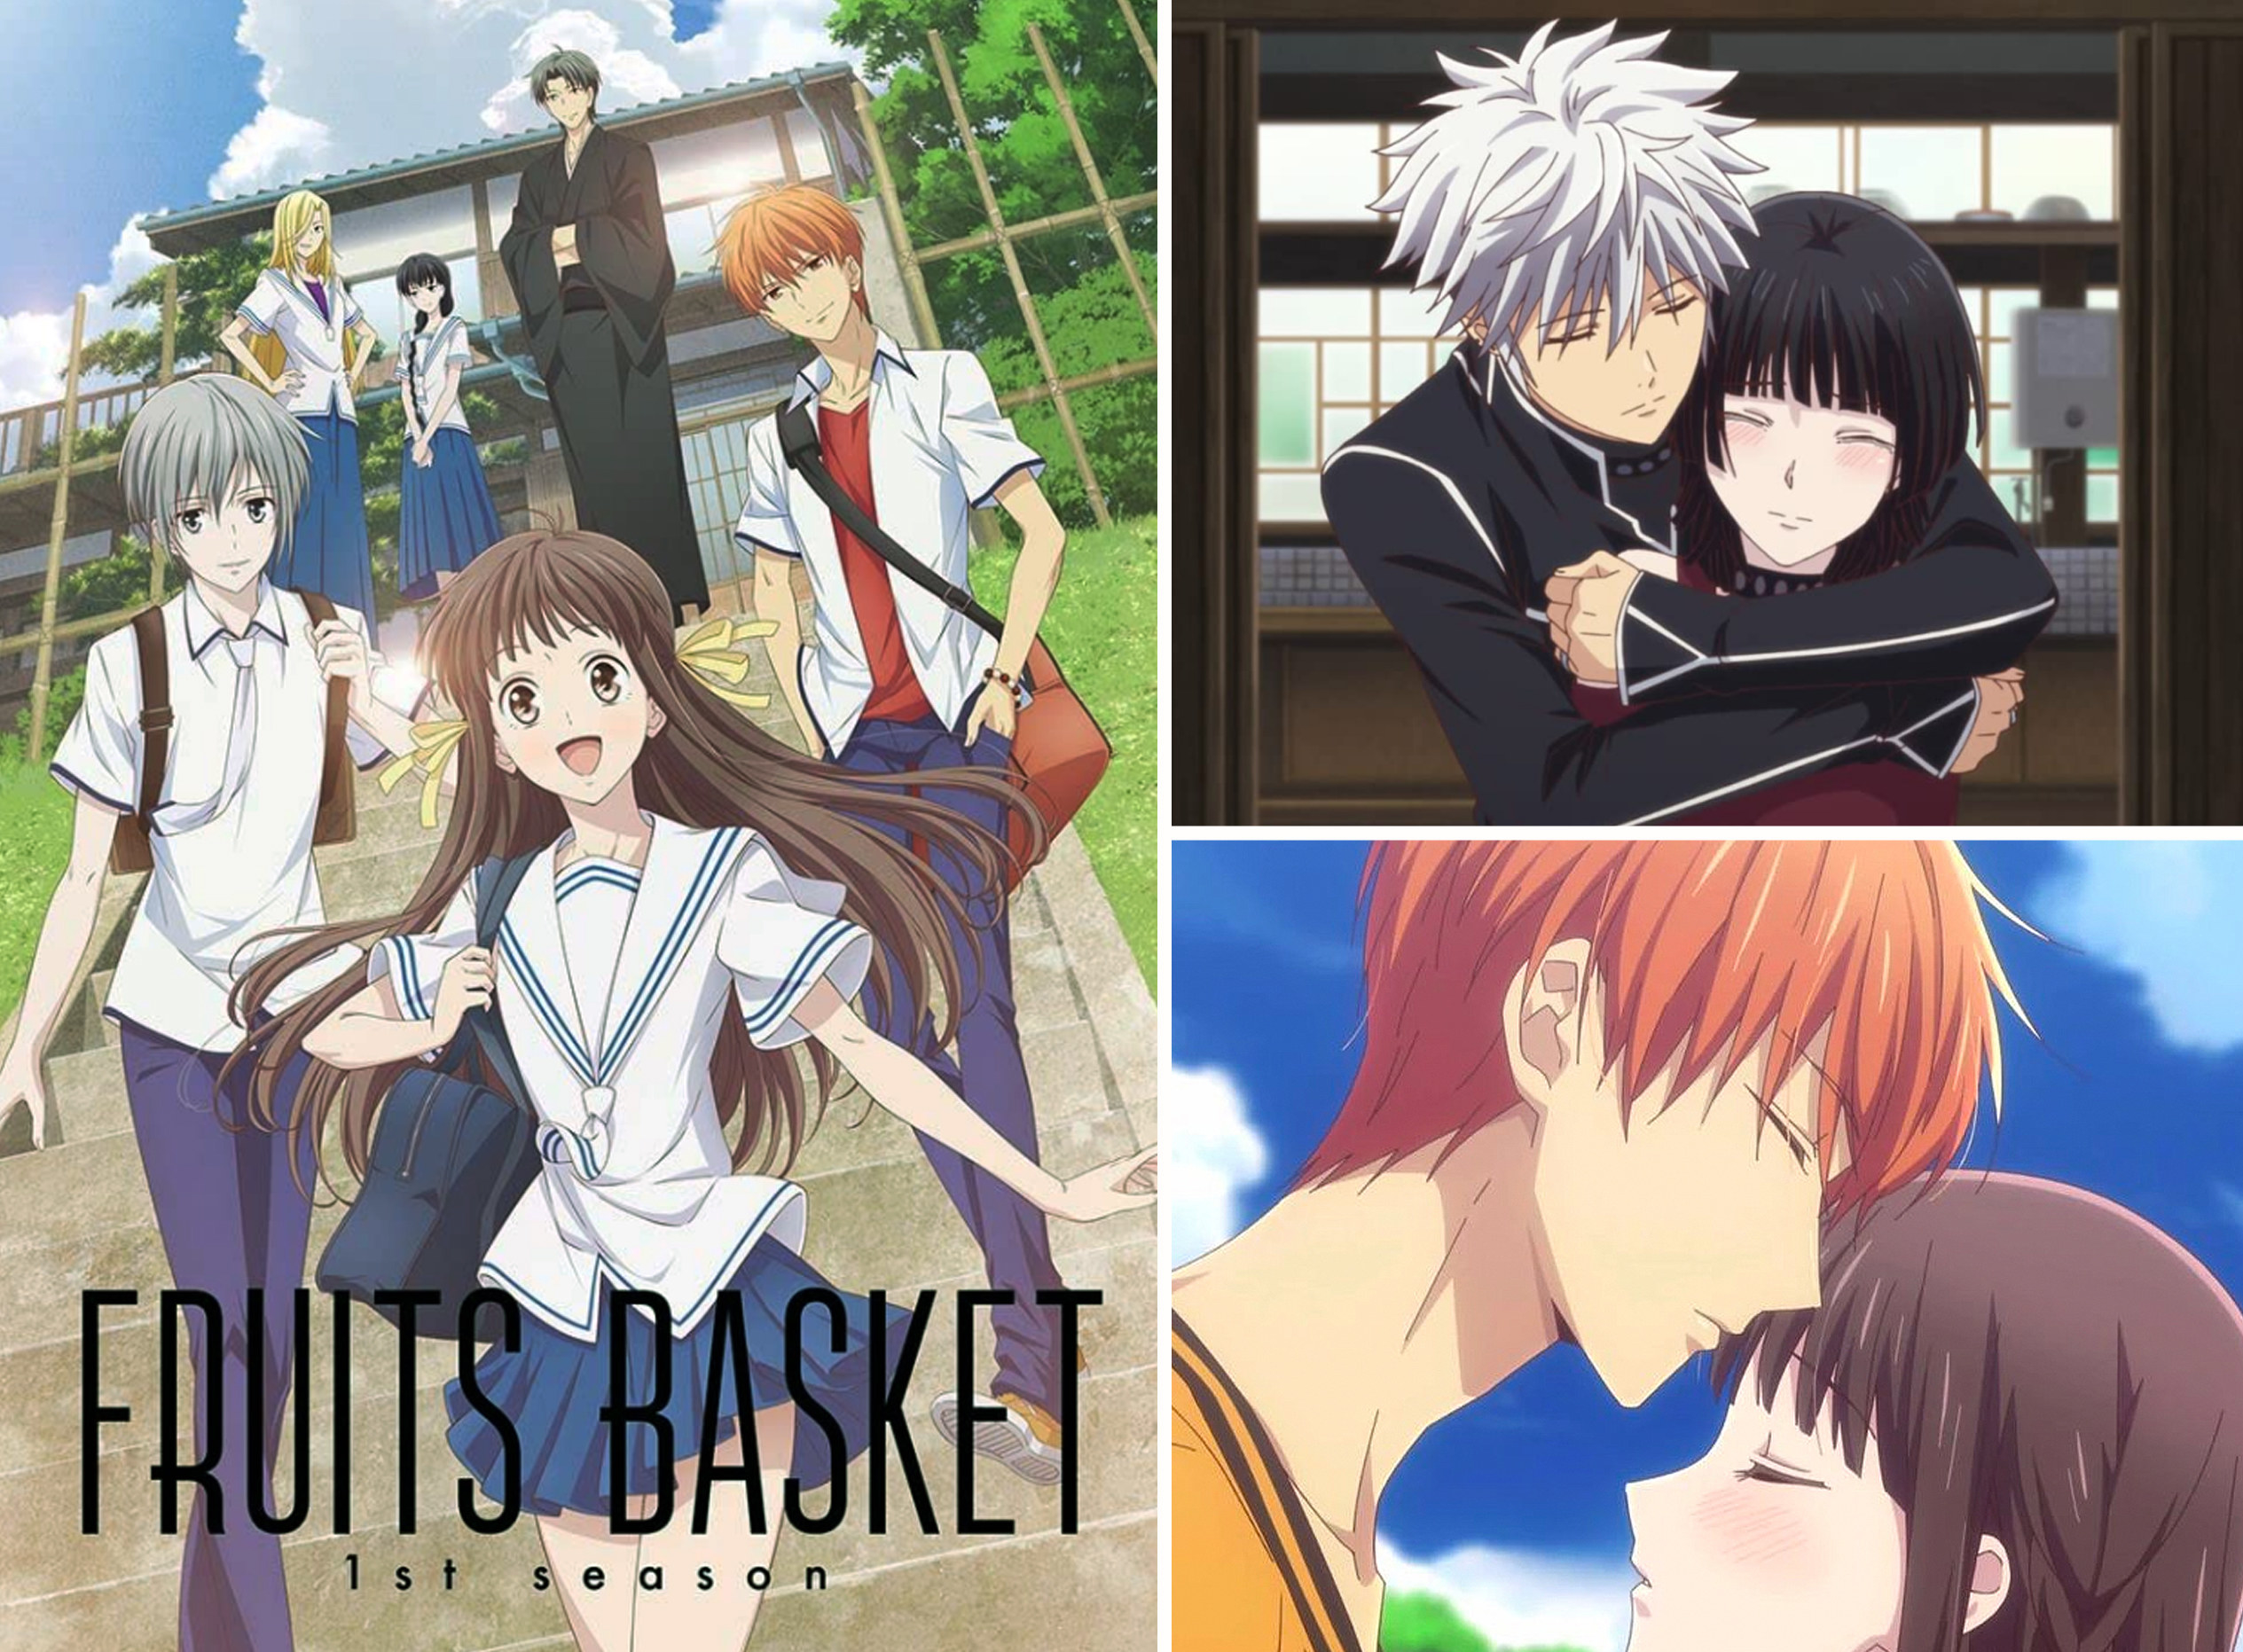 Fruits Basket 2019 Season 3 Review - The Game of Nerds